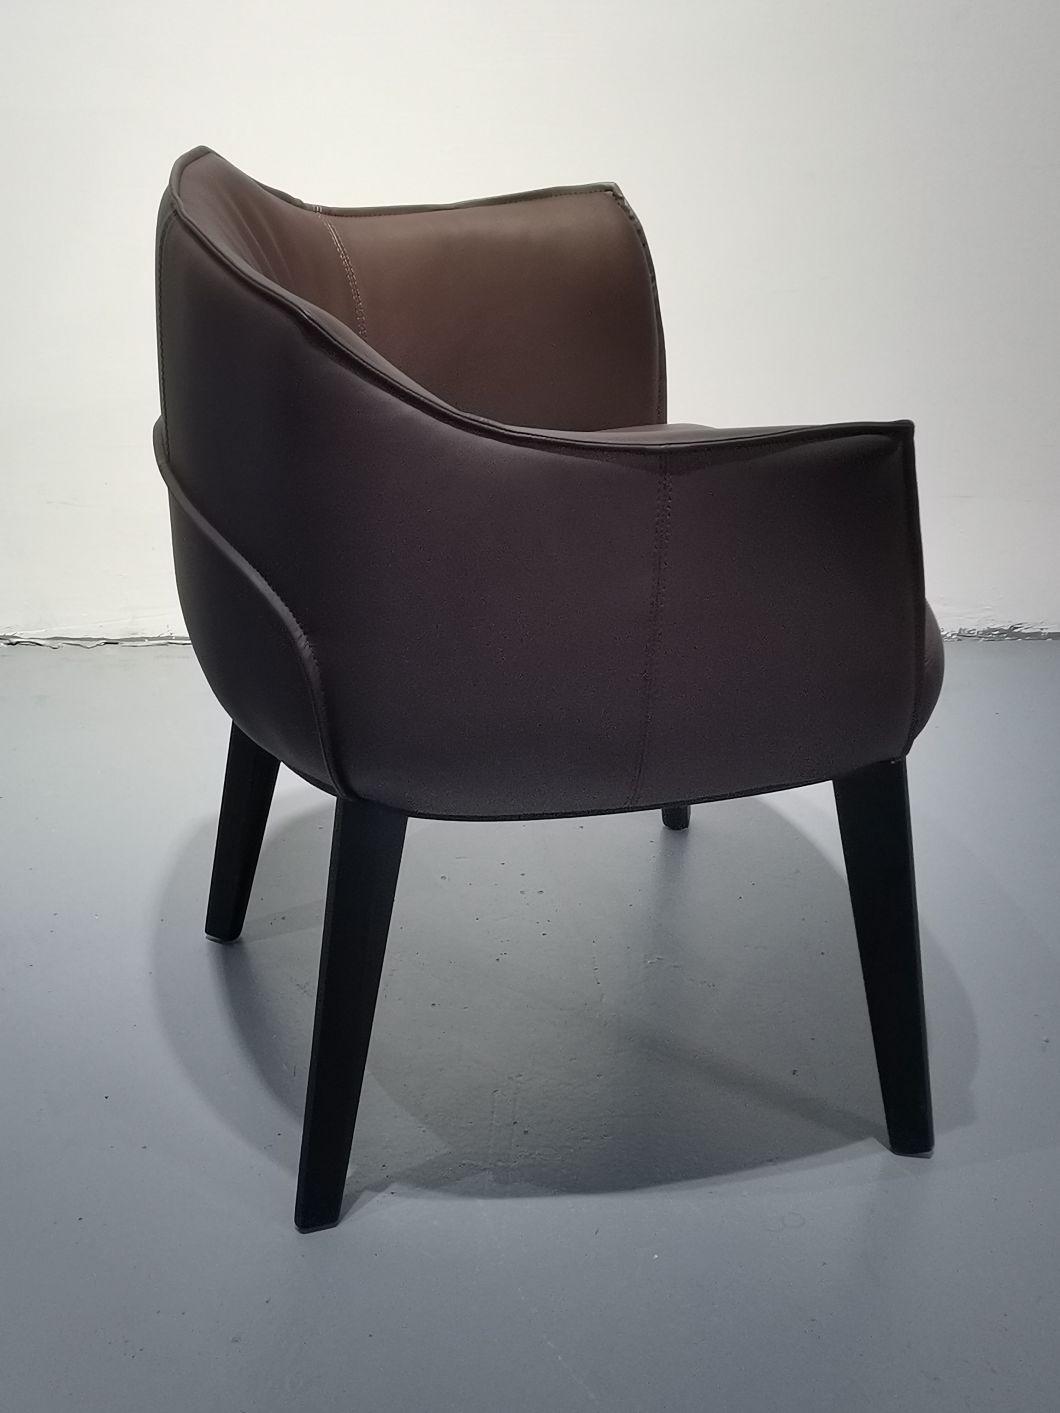 Deluxe Leather or Fabric Upholstery Hotel Bedroom Chair